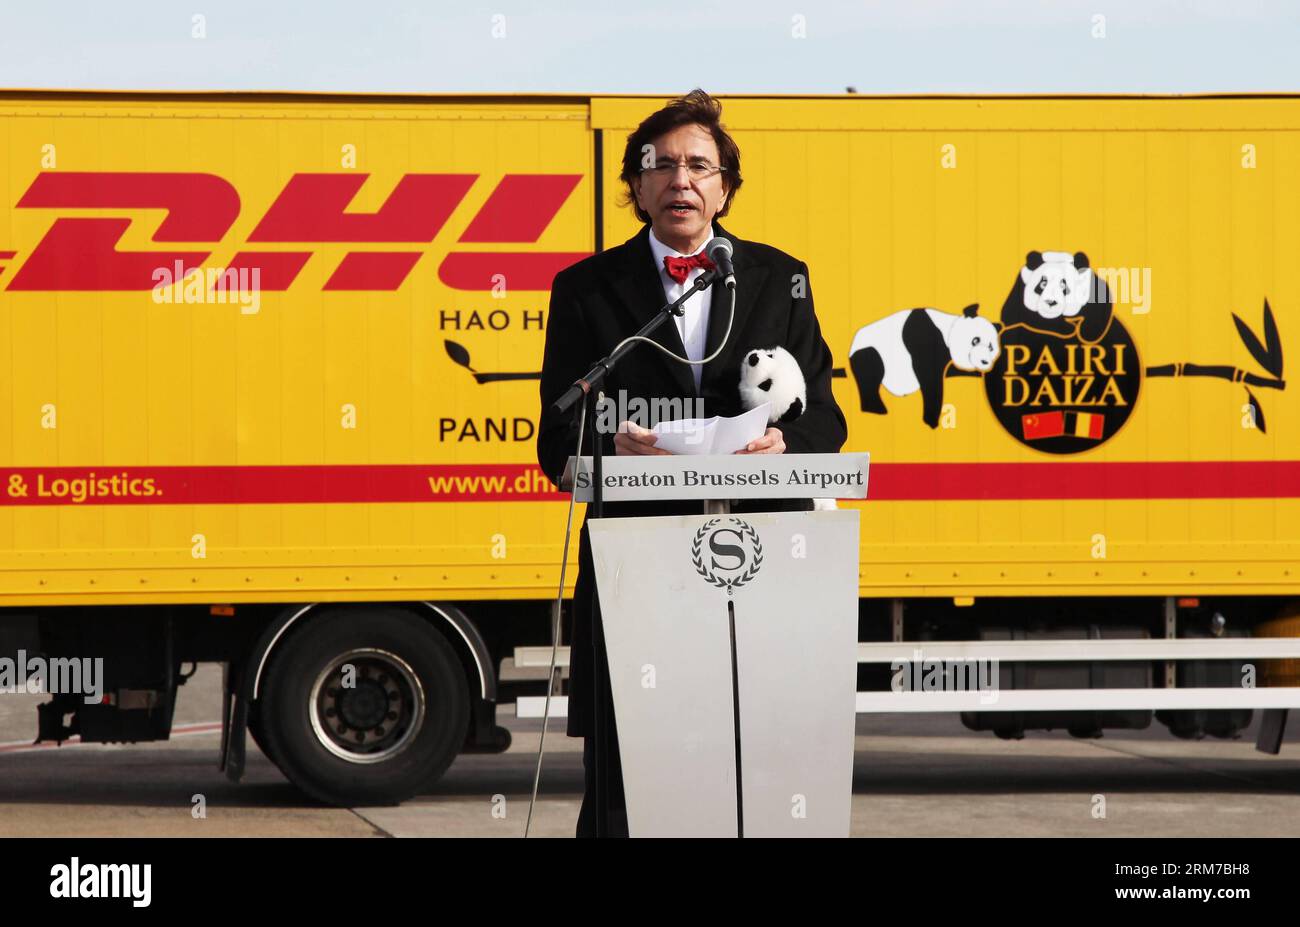 (140223) -- BRUSSELS, Feb. 23, 2014 (Xinhua) -- Belgian Prime Minister Elio Di Rupo speaks during the welcoming ceremony for the two giant pandas Xing Hui and Hao Hao at the Brussels National Airport in the capital of Belgium on Feb. 23, 2014. The pair of giant pandas, Xing Hui, the male, and Hao Hao, the female, arrived in Belgium Sunday, on lease from their breeding center in southwest China s Sichuan Province. They are both four years old and will stay in Belgium for the next 15 years. (Xinhua/Sun Wen) (lyx) BELGIUM-BRUSSELS-CHINA-GIANT PANDAS-ARRIVAL PUBLICATIONxNOTxINxCHN   Brussels Feb 2 Stock Photo